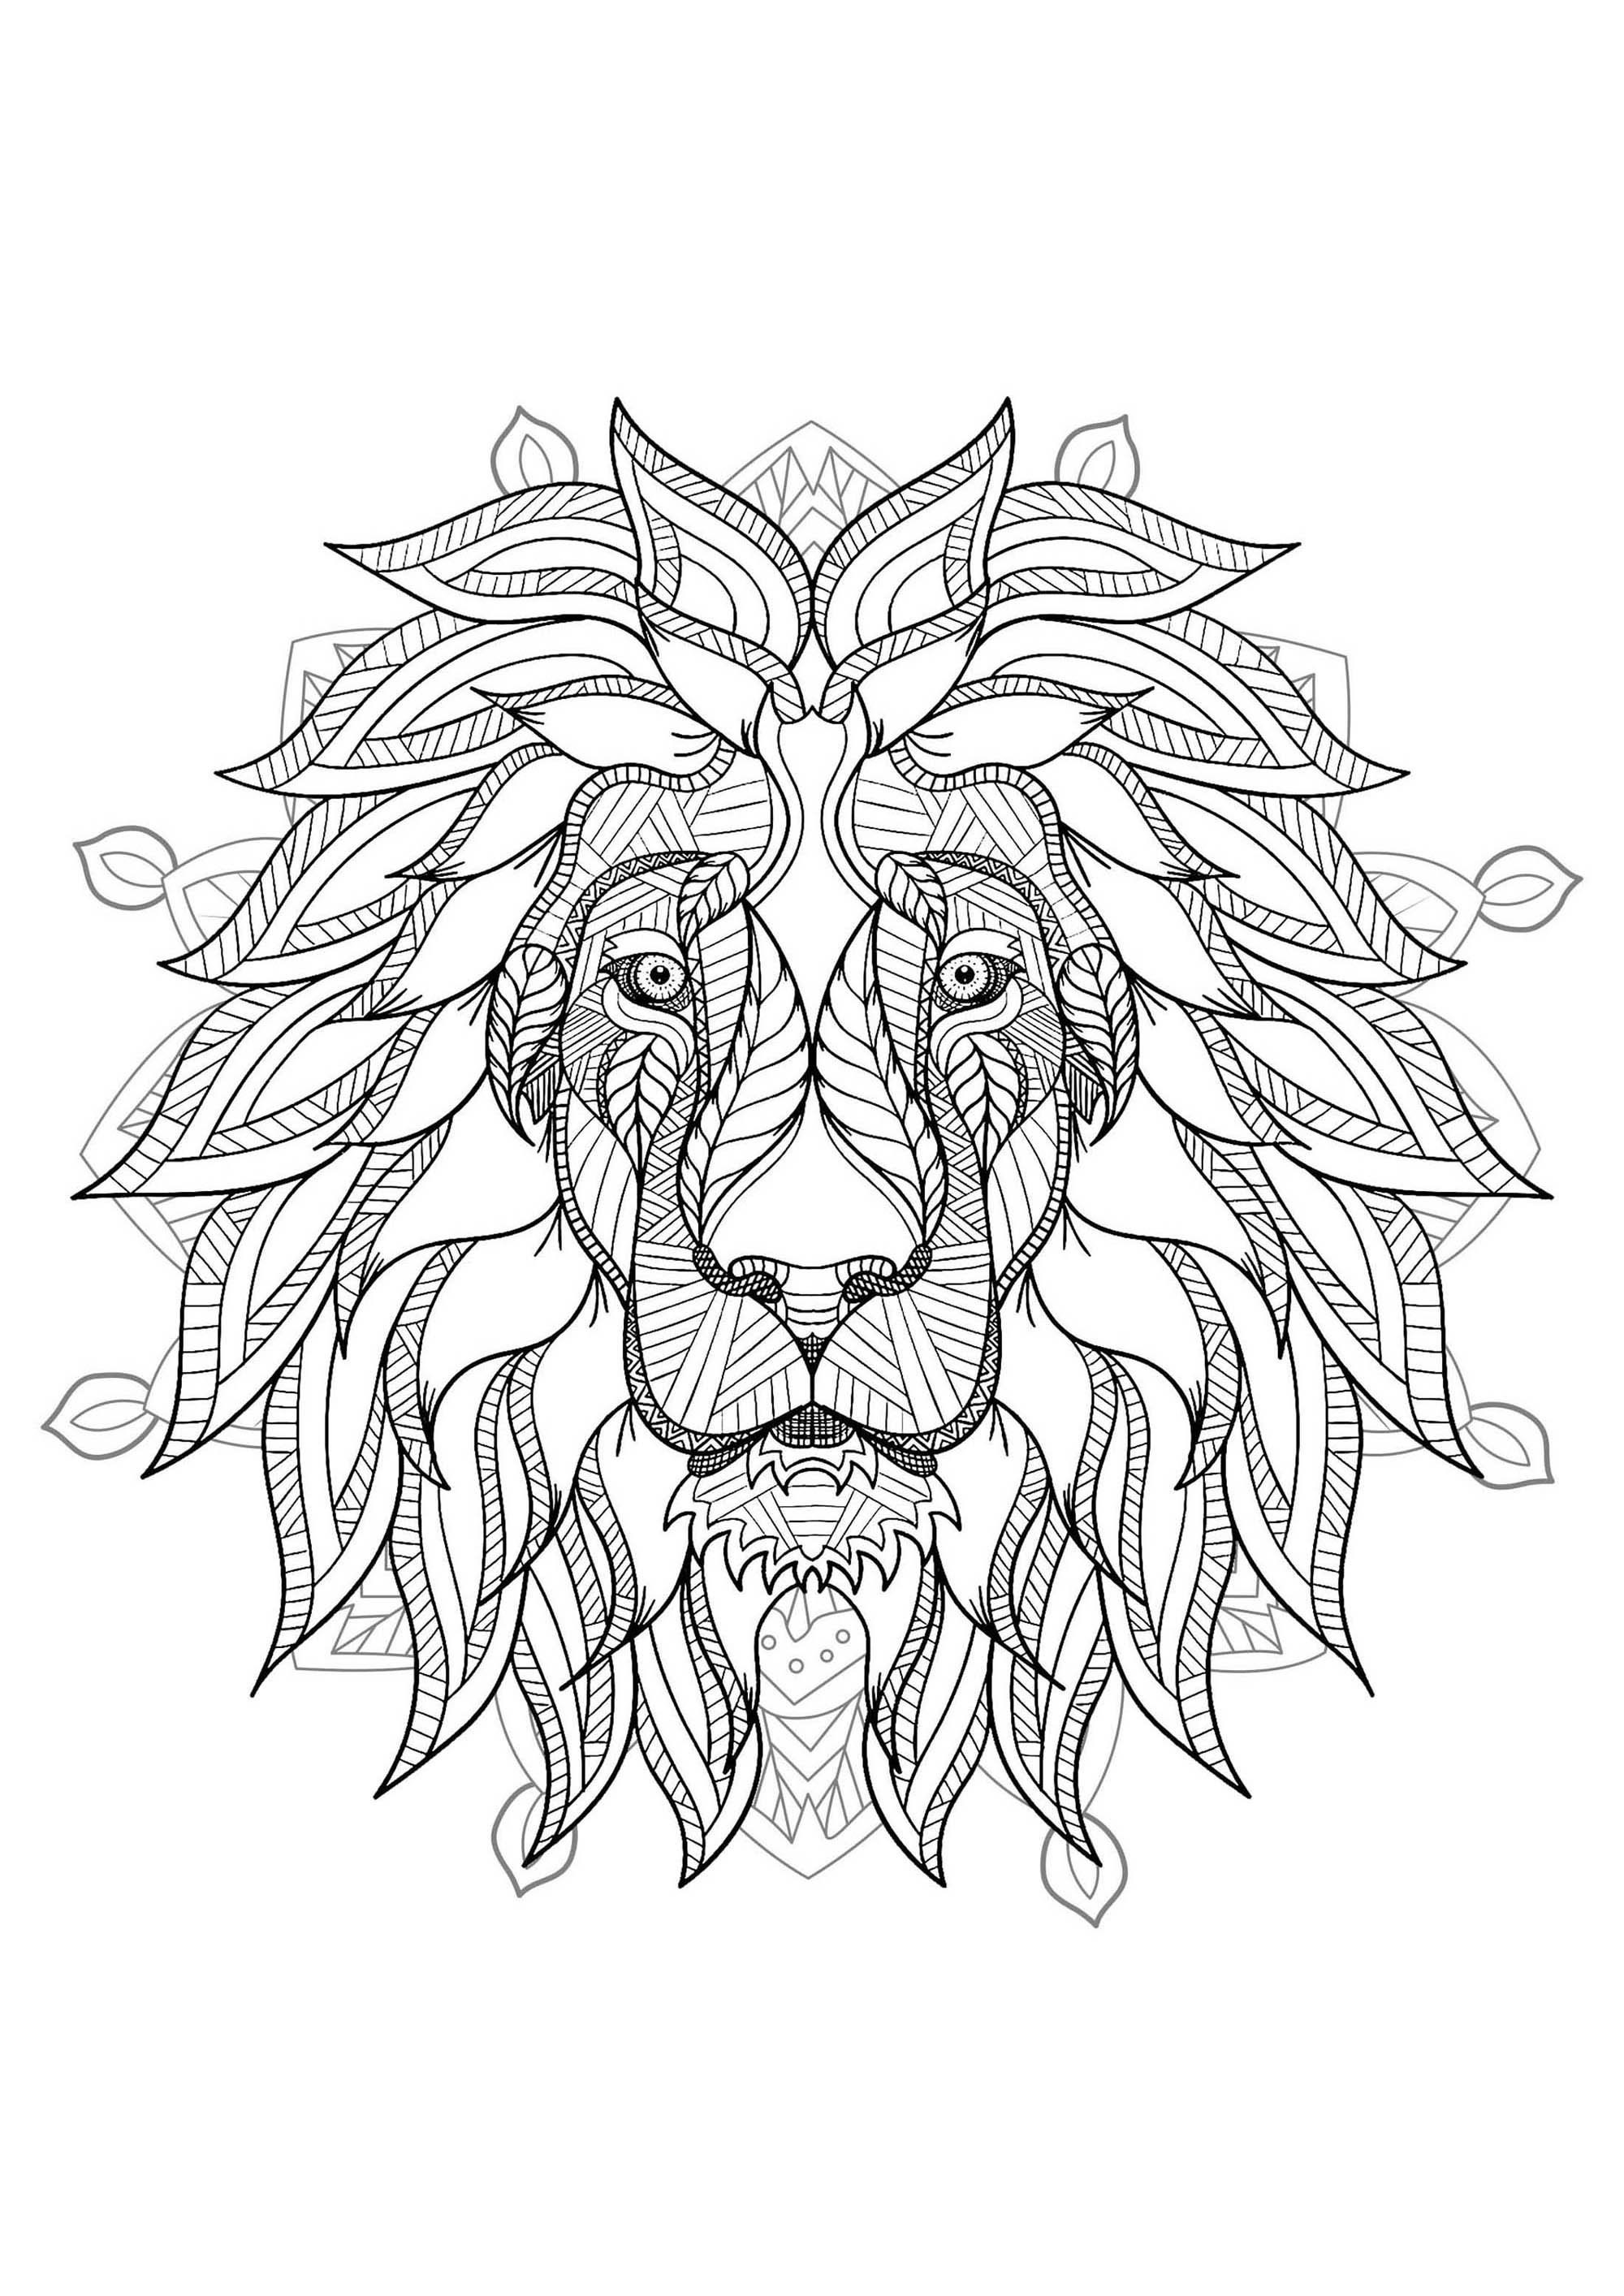 Lion head in a difficult Mandala. If you are ready to color during a long time, get ready to color this incredible Mandala coloring page ... You can use the colors you prefer.